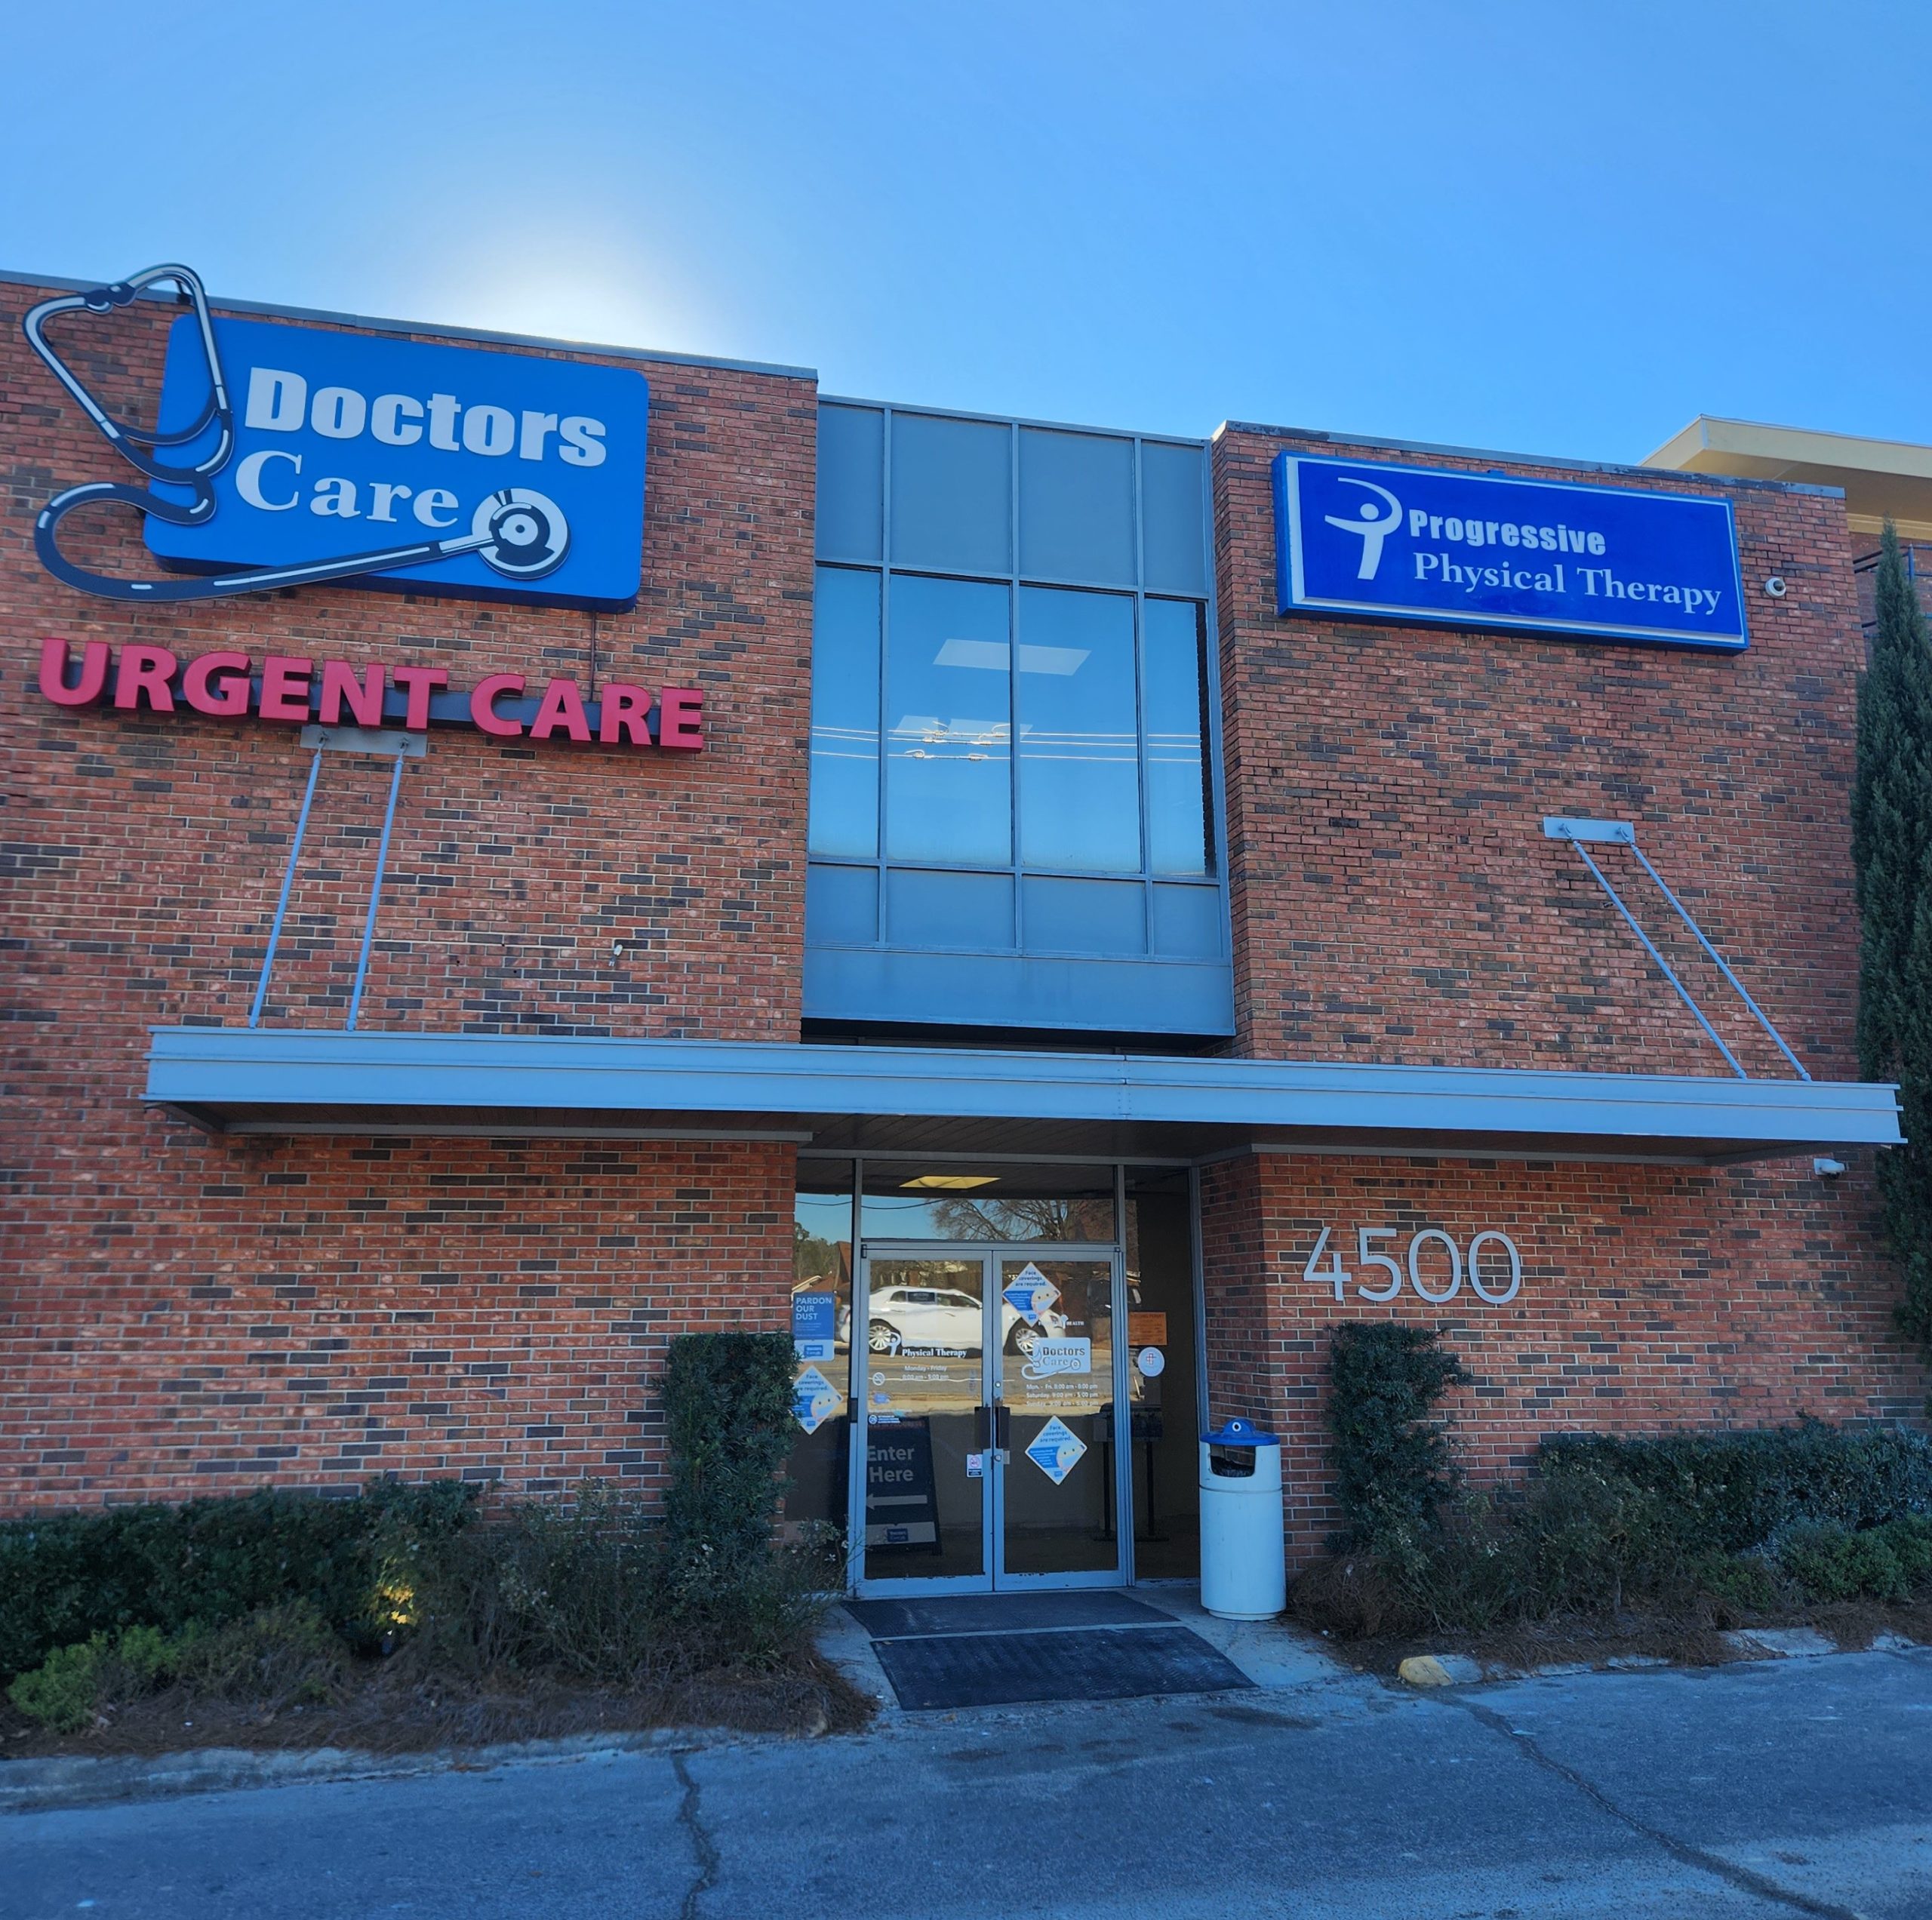 Doctors Care and Progresive Physical Therapy building on Forest Drive in Columbia, South Carolina